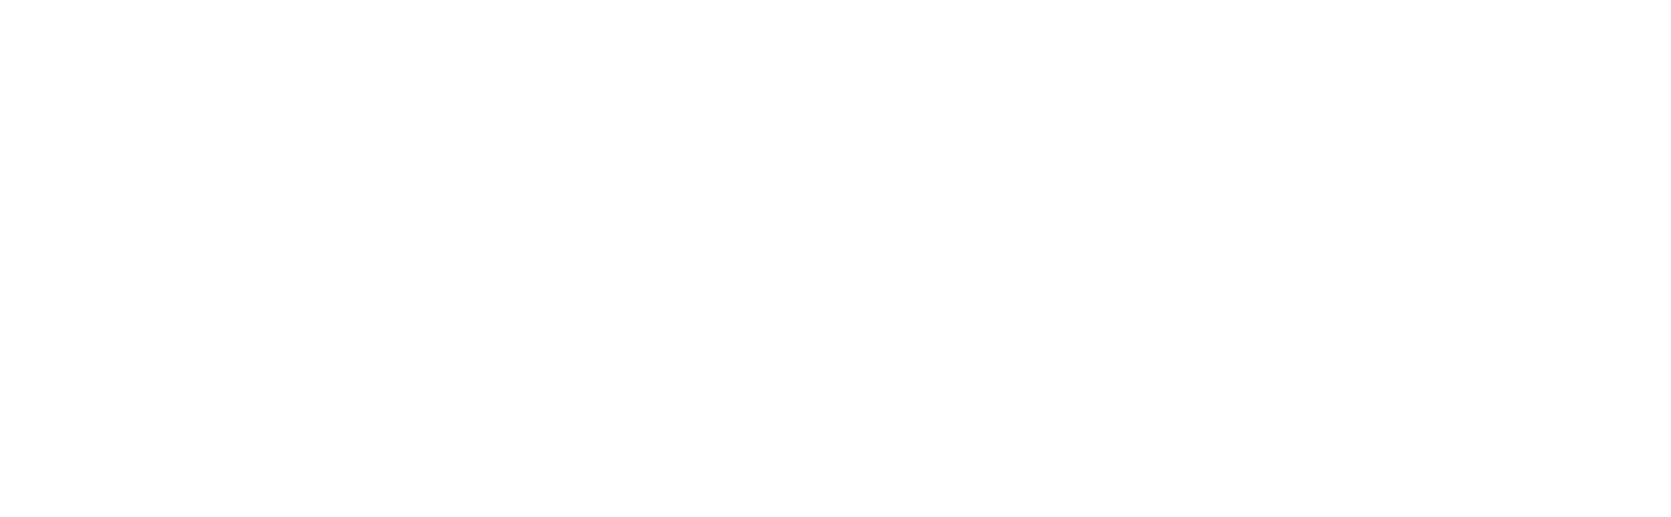 SUSTAINABLE TRANSPORT COOLING FLEXIBLE DELIVERY